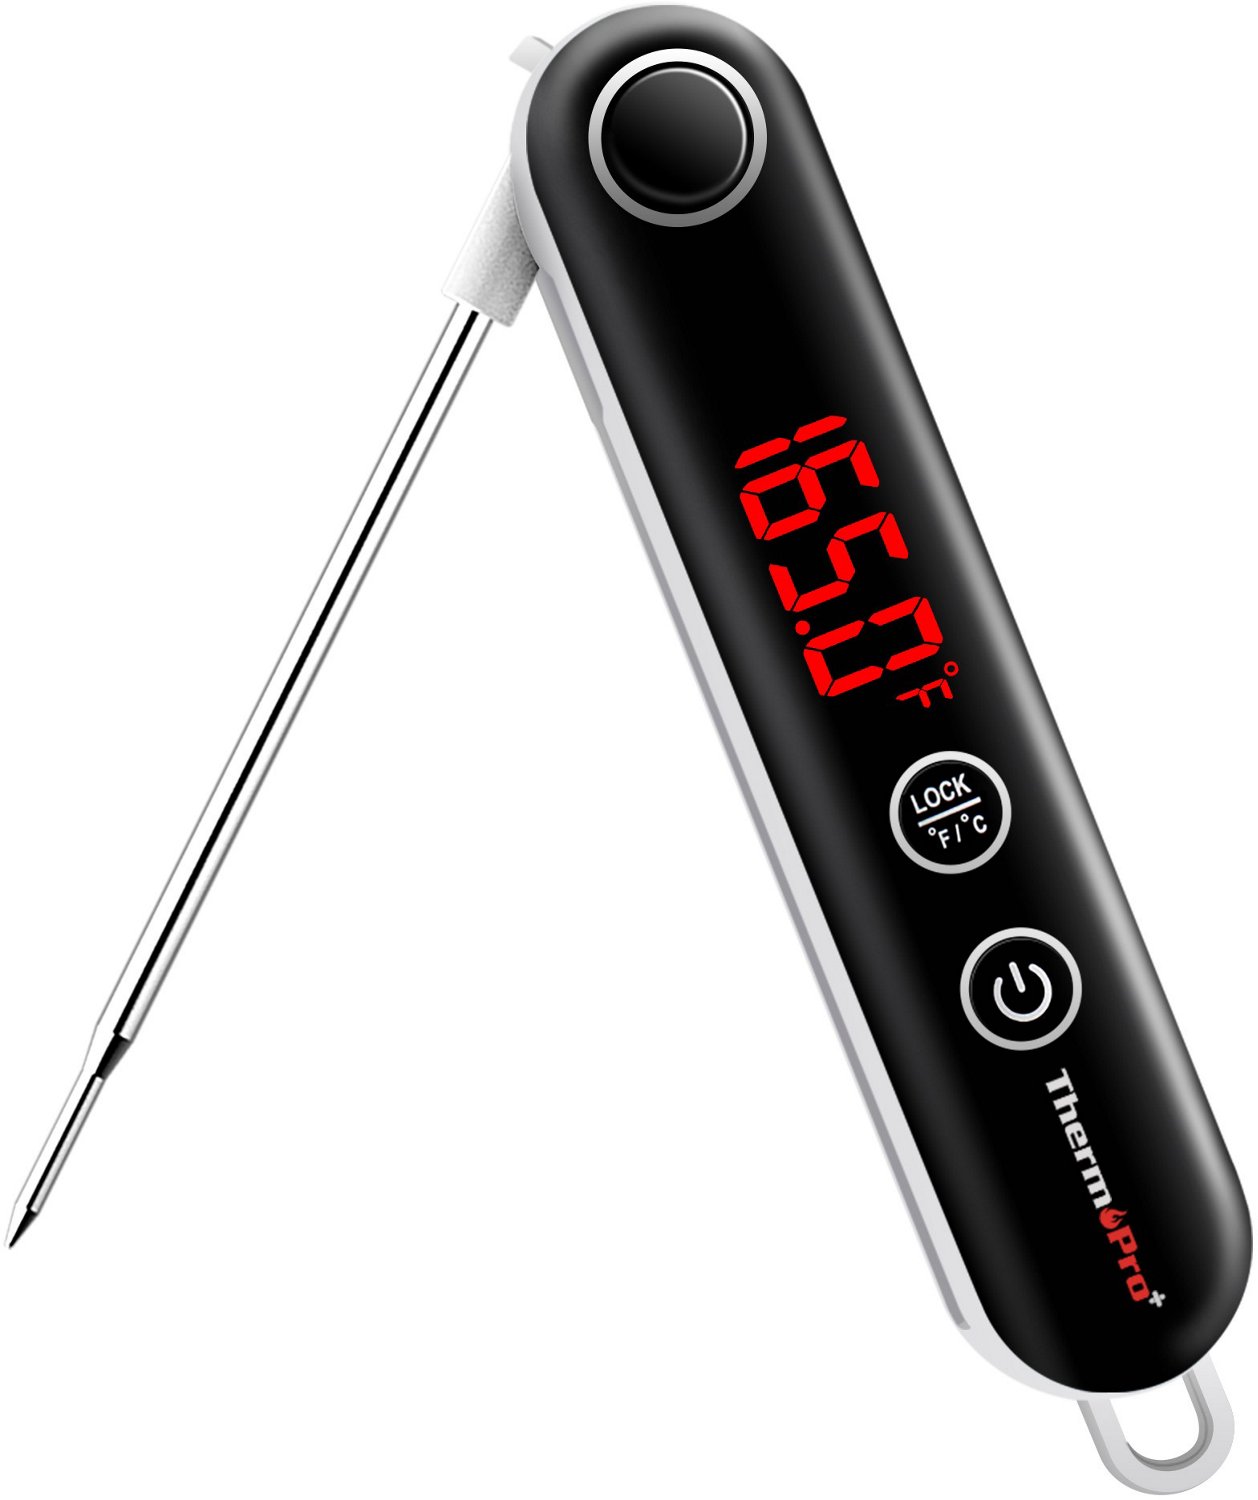 ThermoPro TP-18 Digital Instant Read Cooking Thermometer